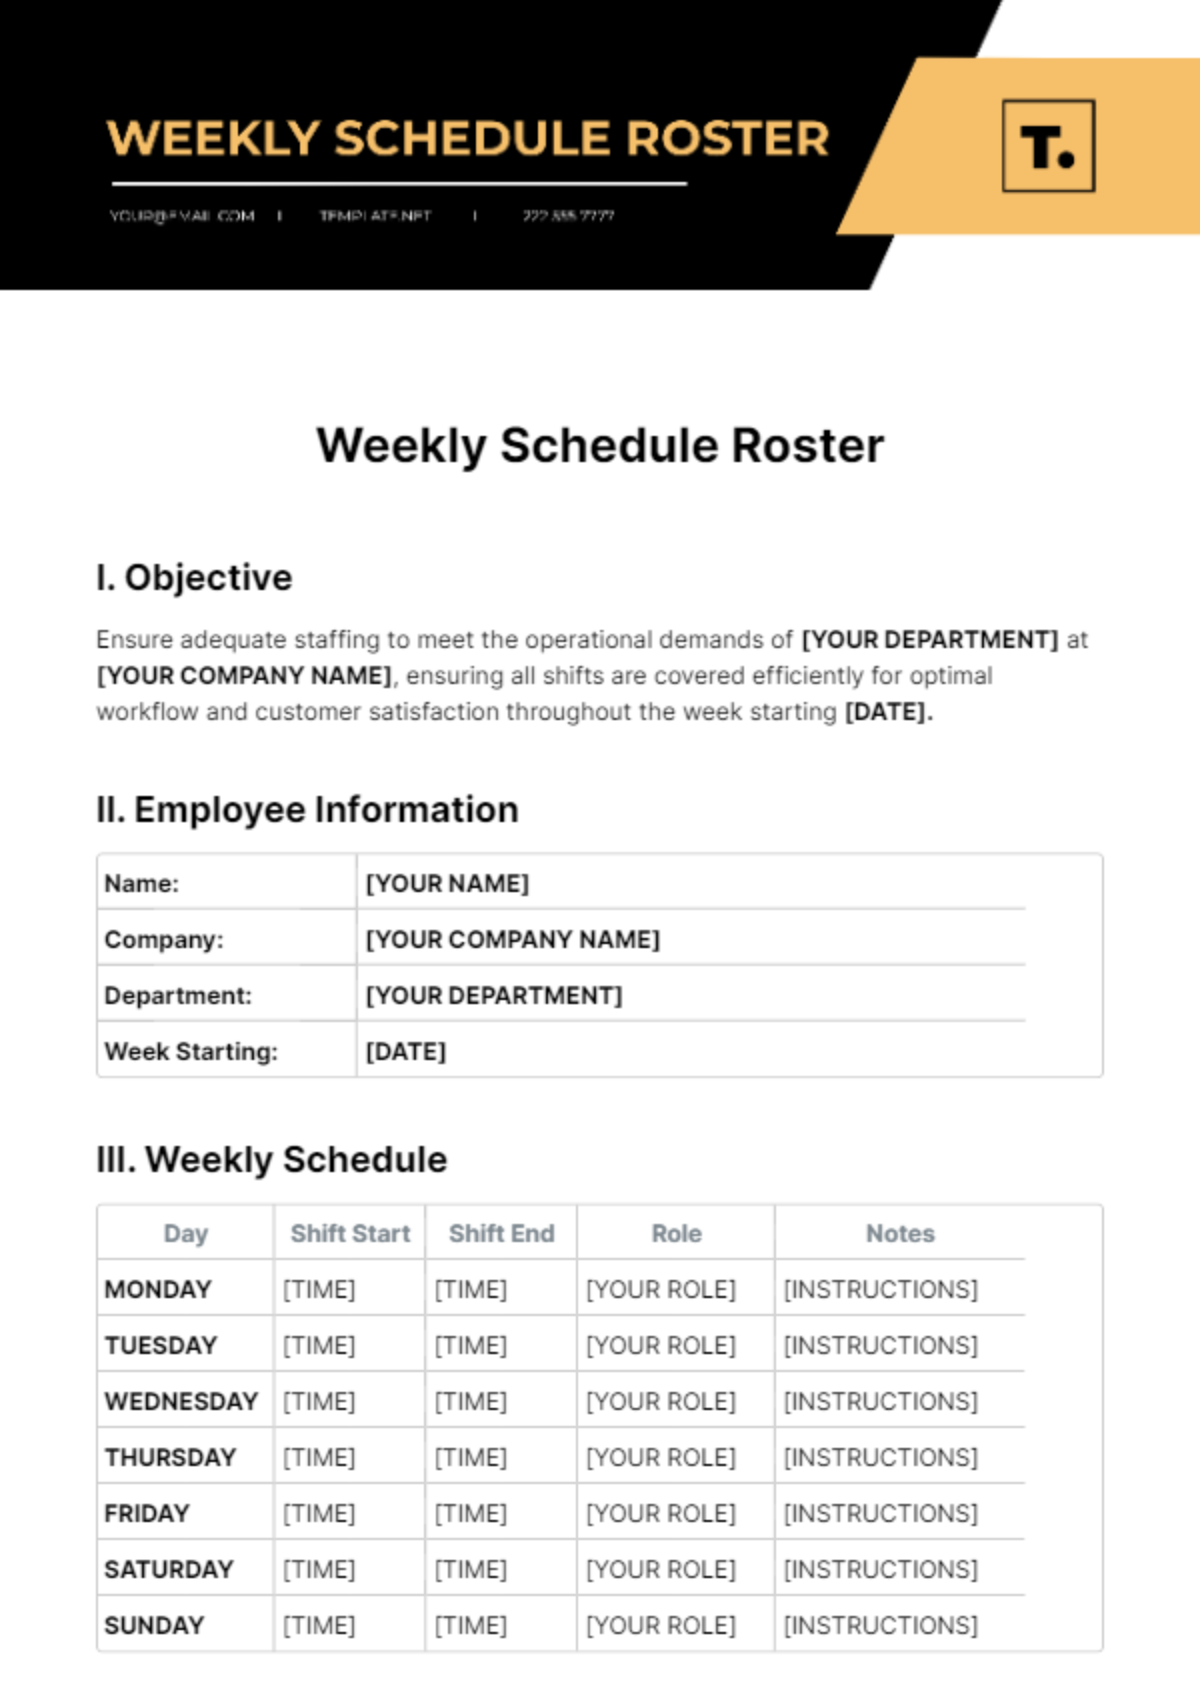 Free Weekly Schedule Roster Template